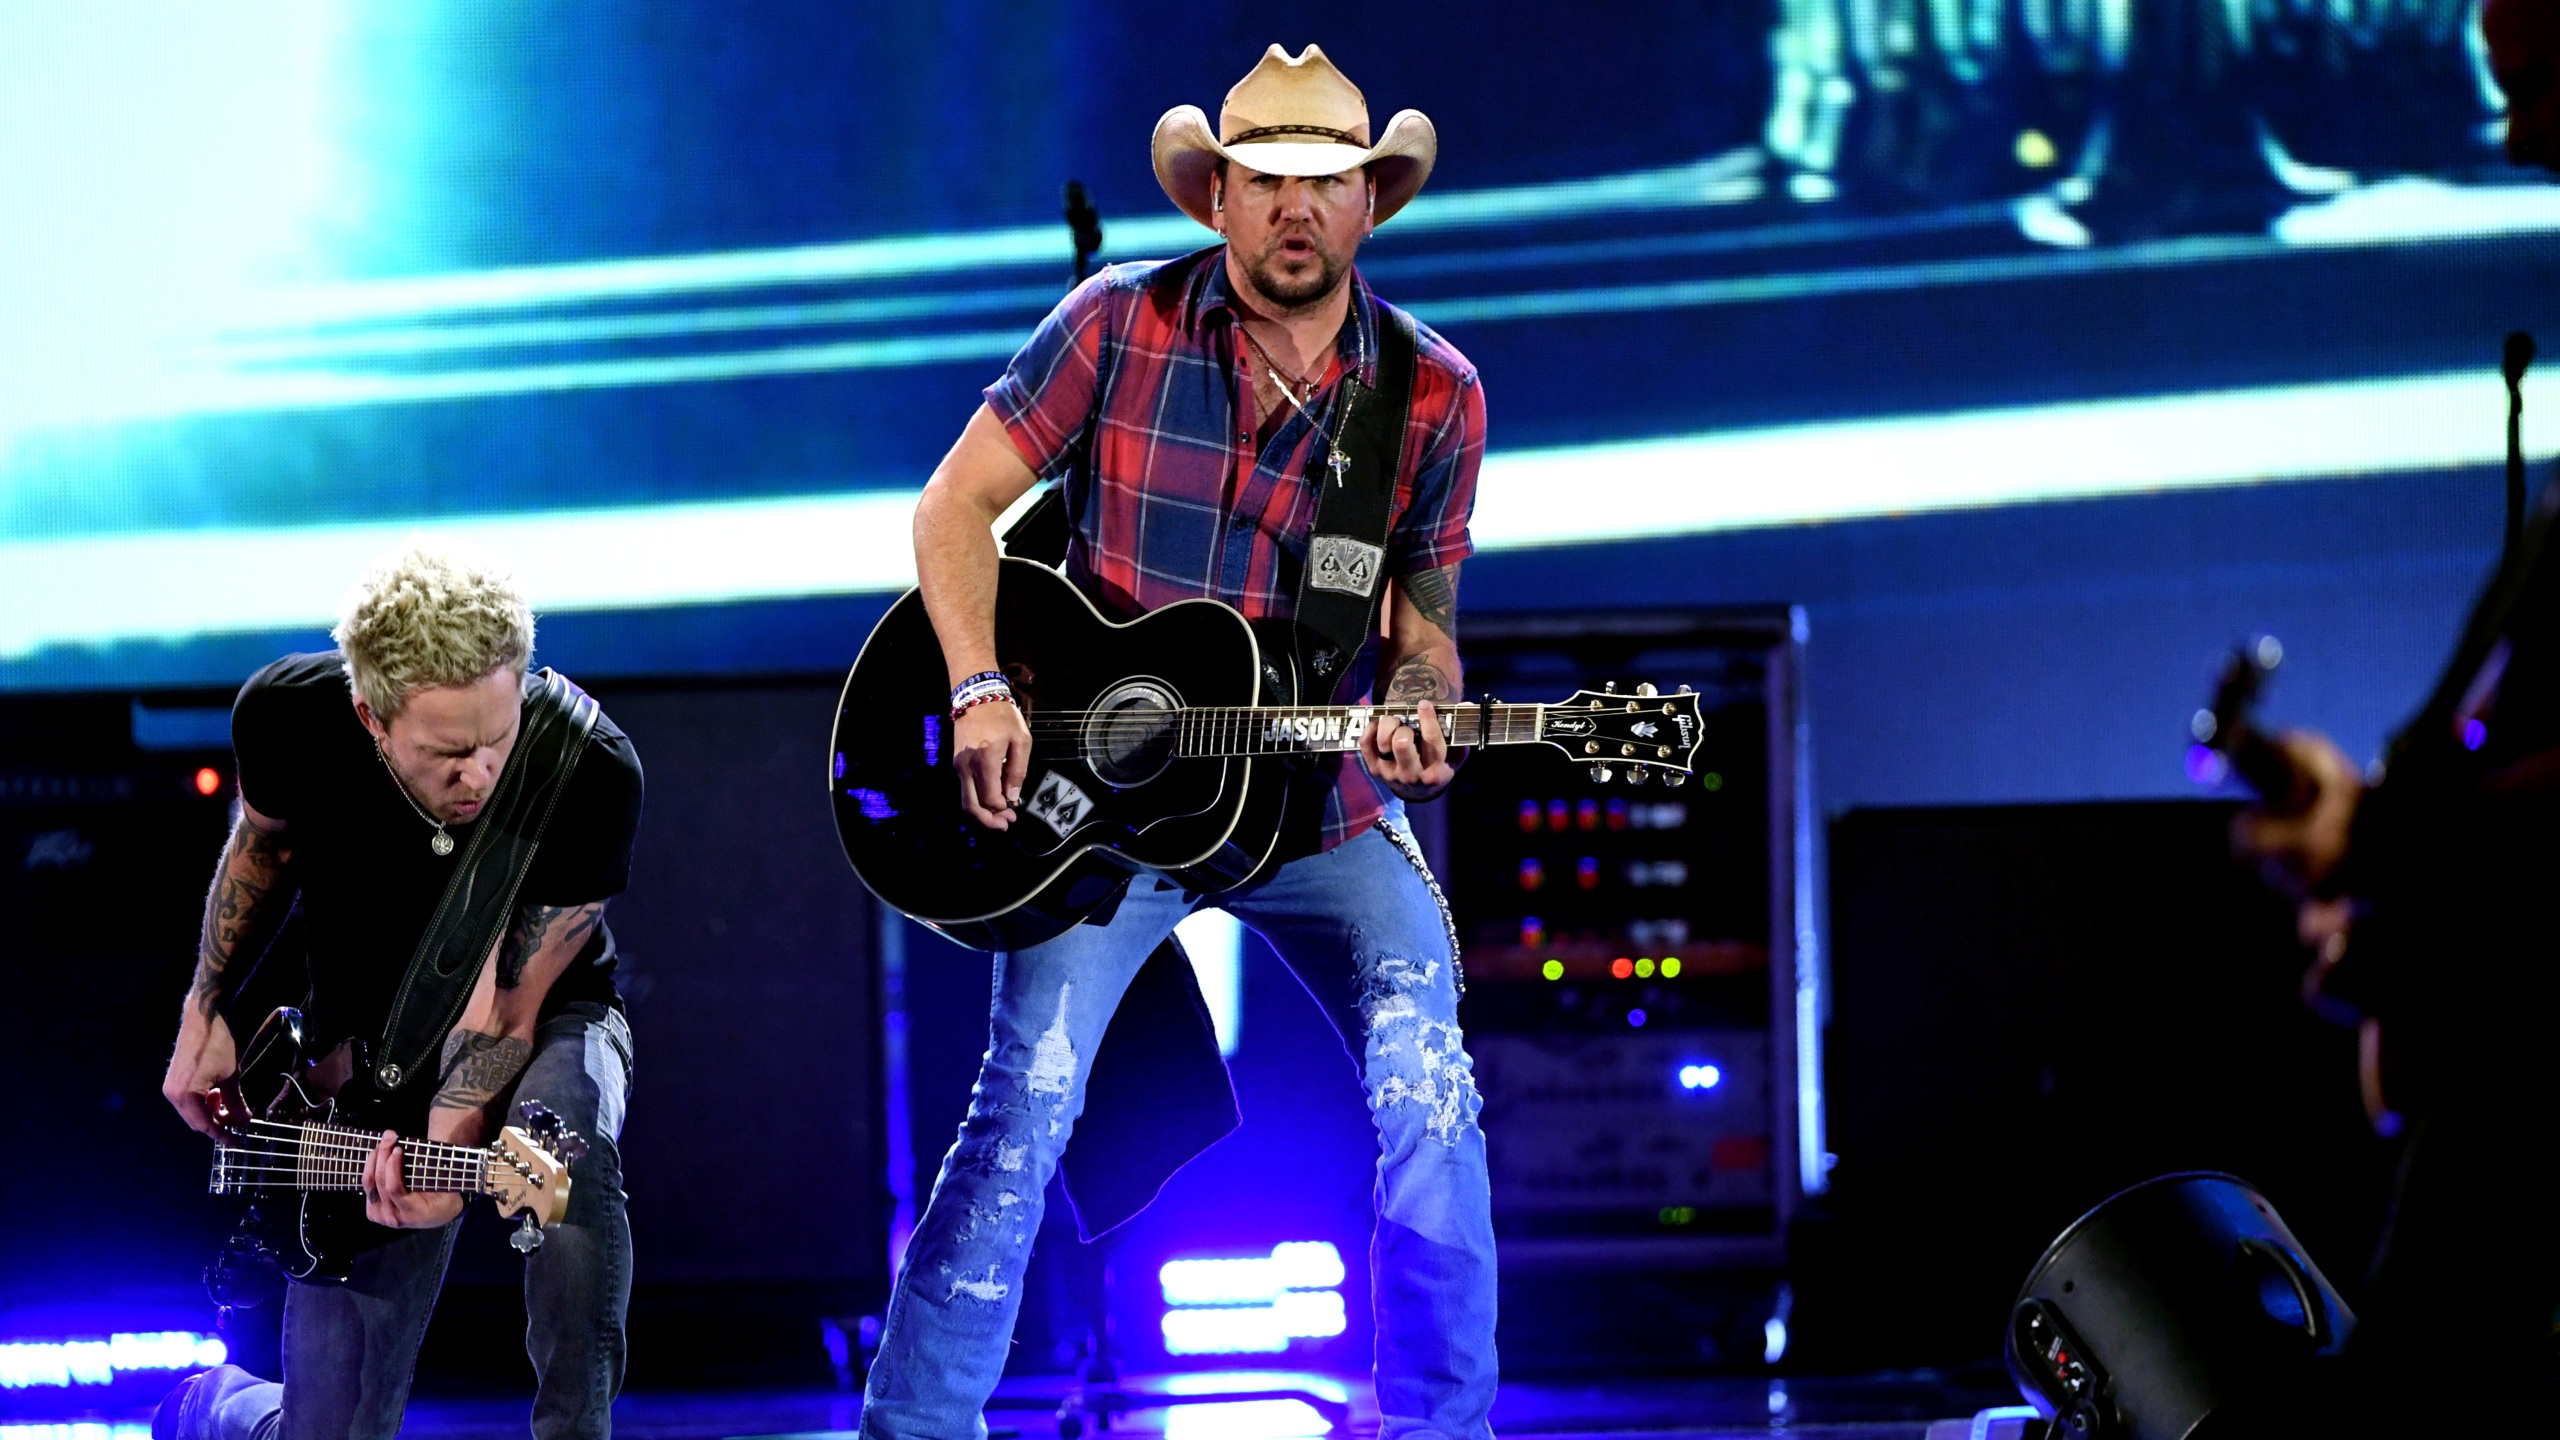 Jason Aldean Headlining Show At The Amphitheater This Spring